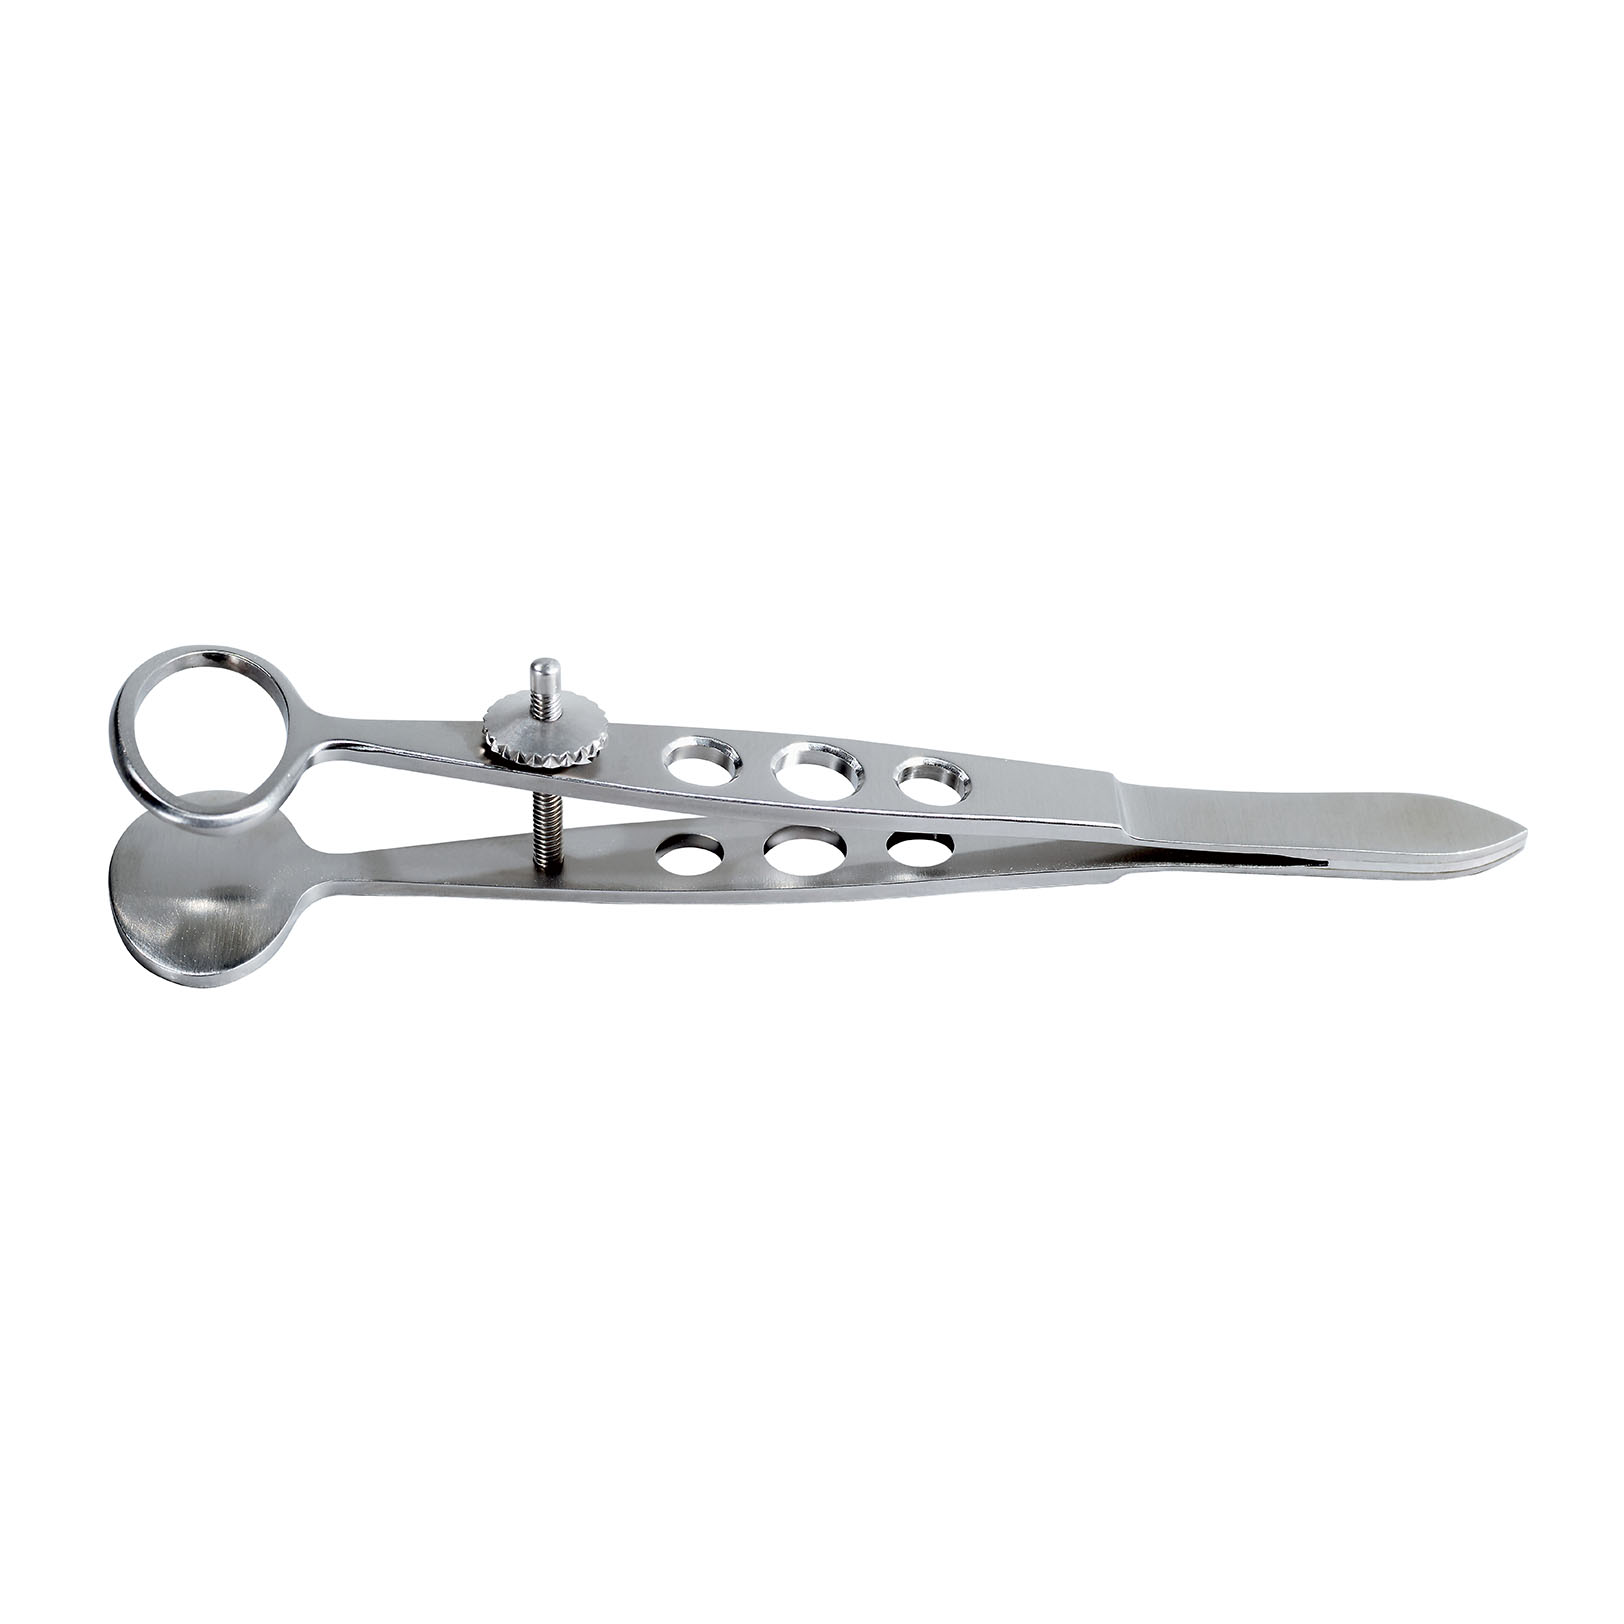 IF-9302 Stainless Steel Chalazion Forceps